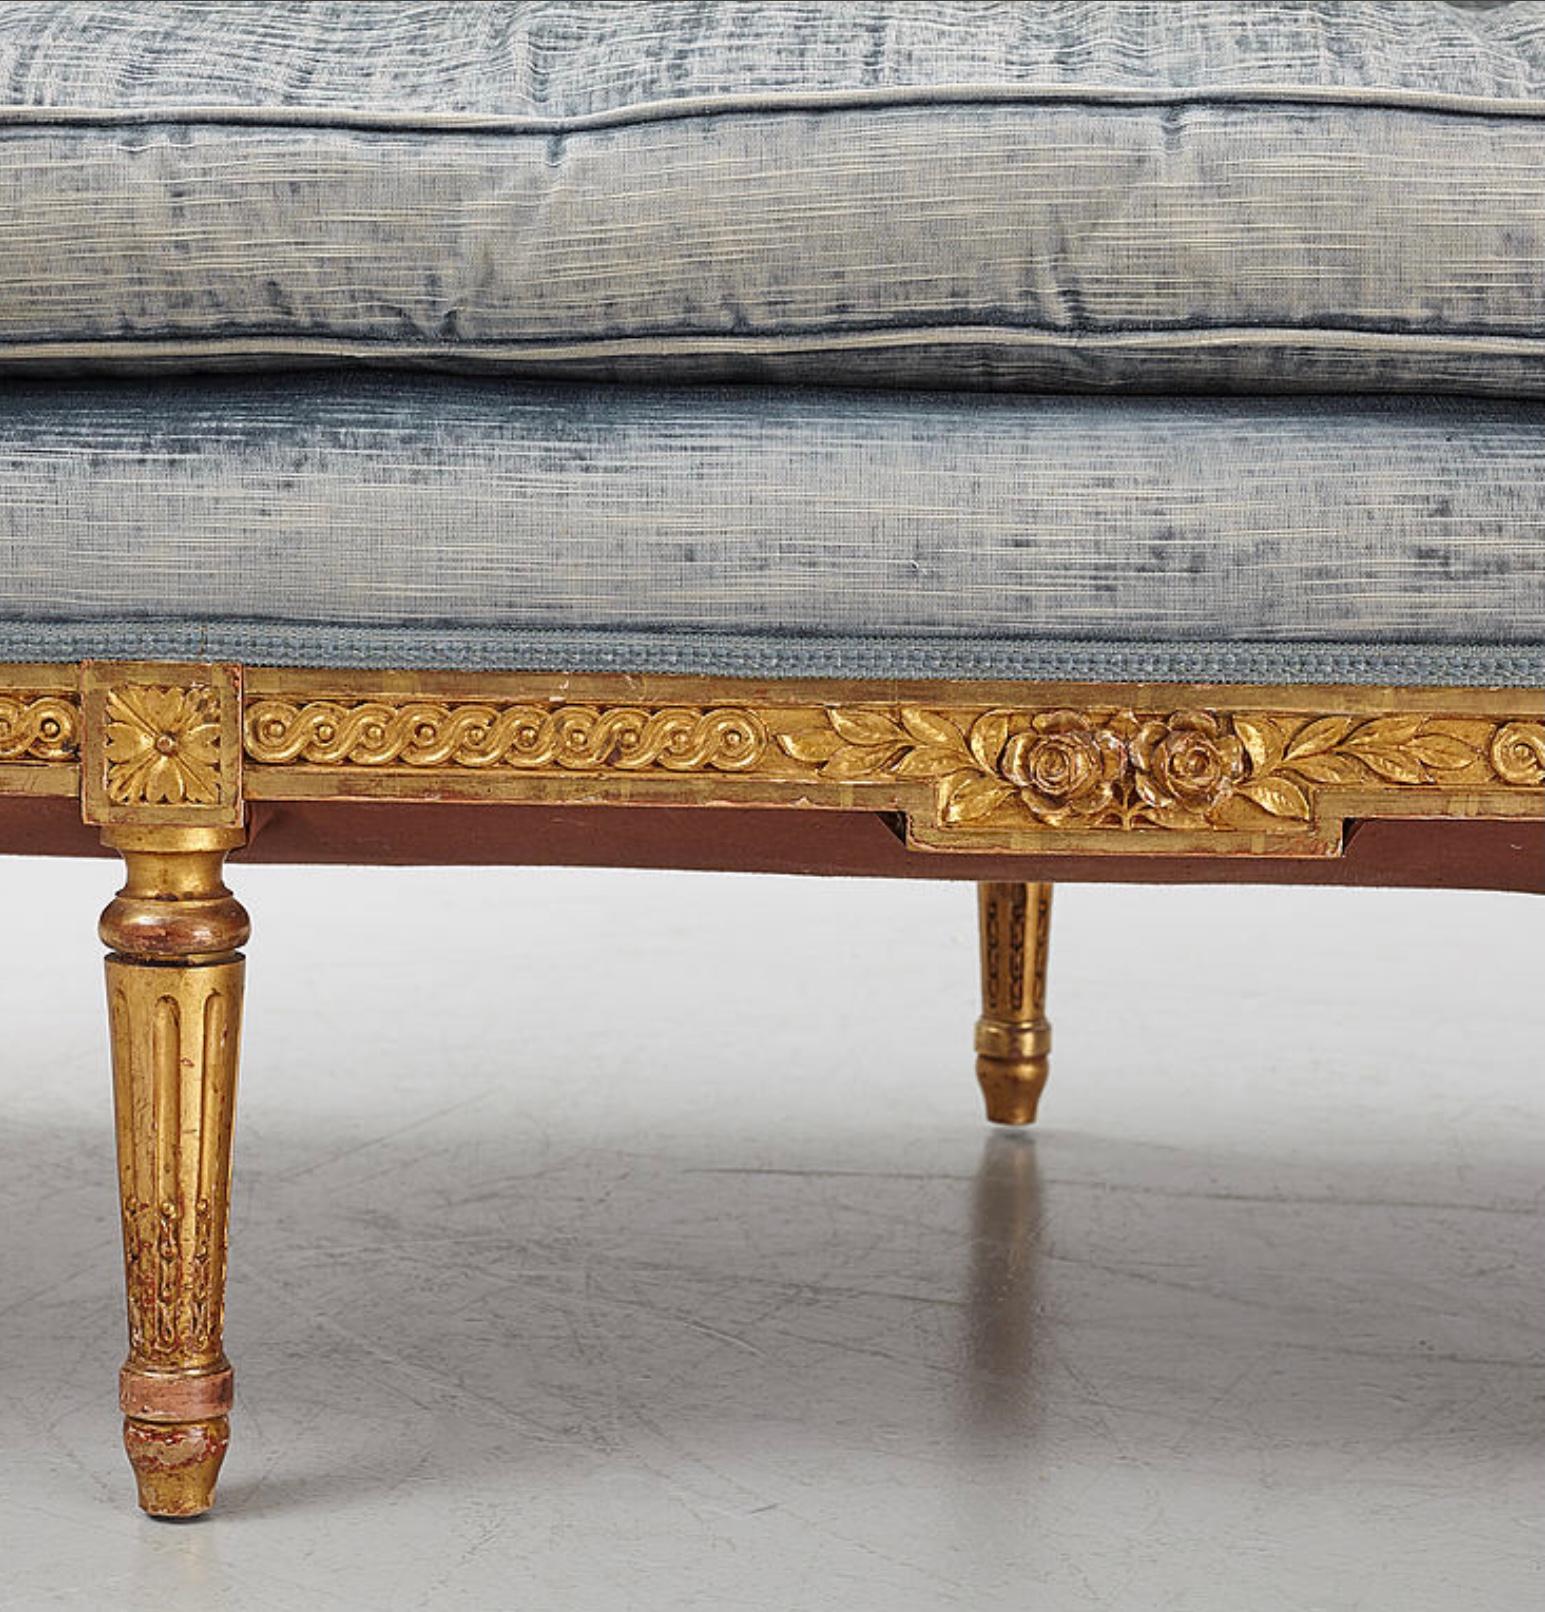 1900s Swedish Two-Seater Gustavian Style Gilt Velvet Sofa with Carved Decoration For Sale 1